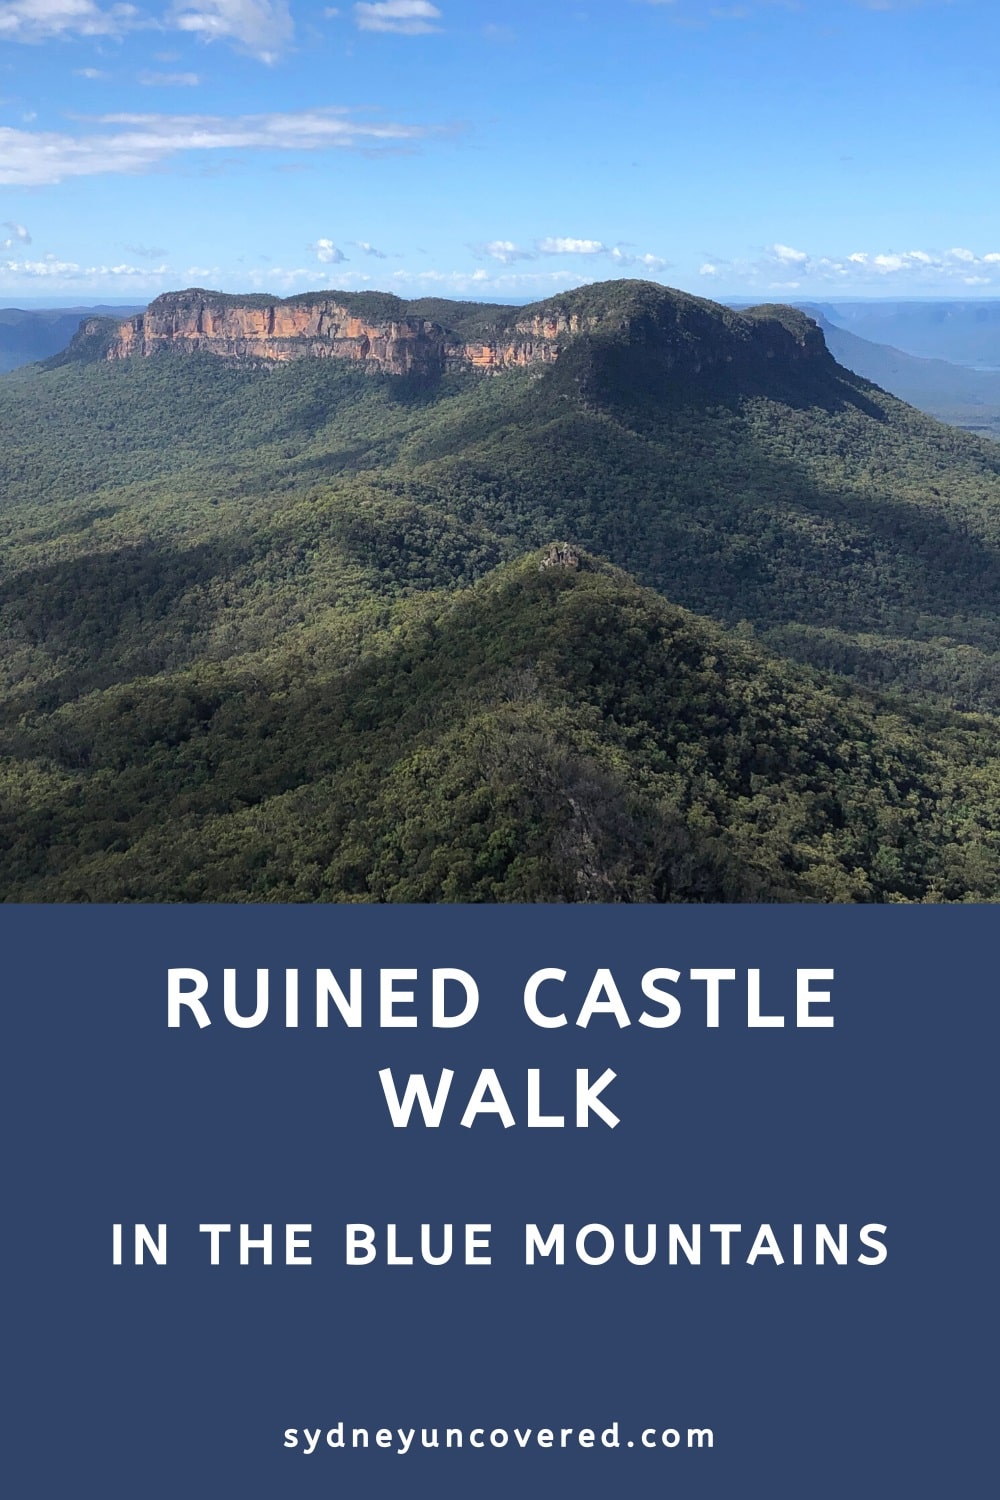 Ruined Castle Walk in the Blue Mountains